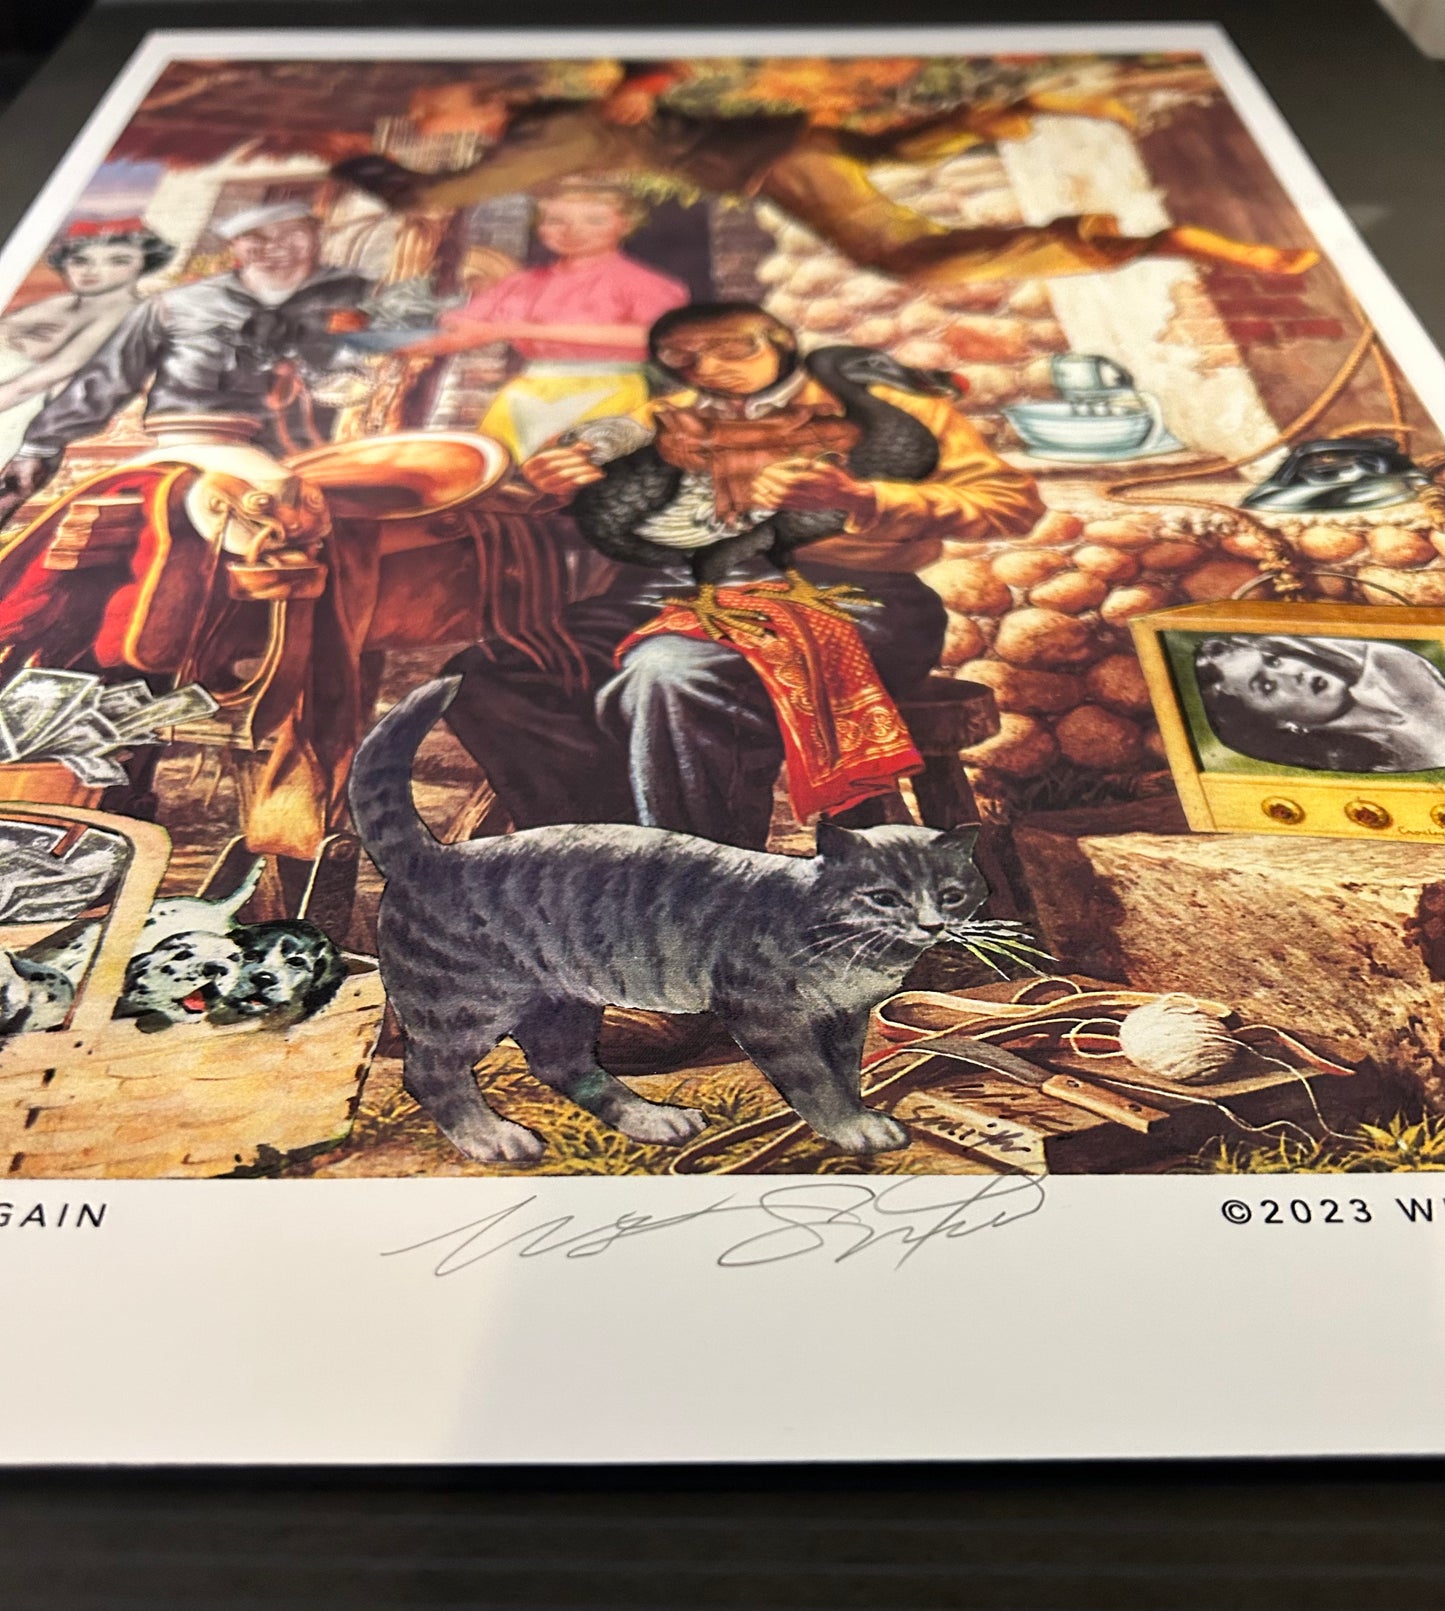 Winston Smith “Back In The Saddle Again” Print